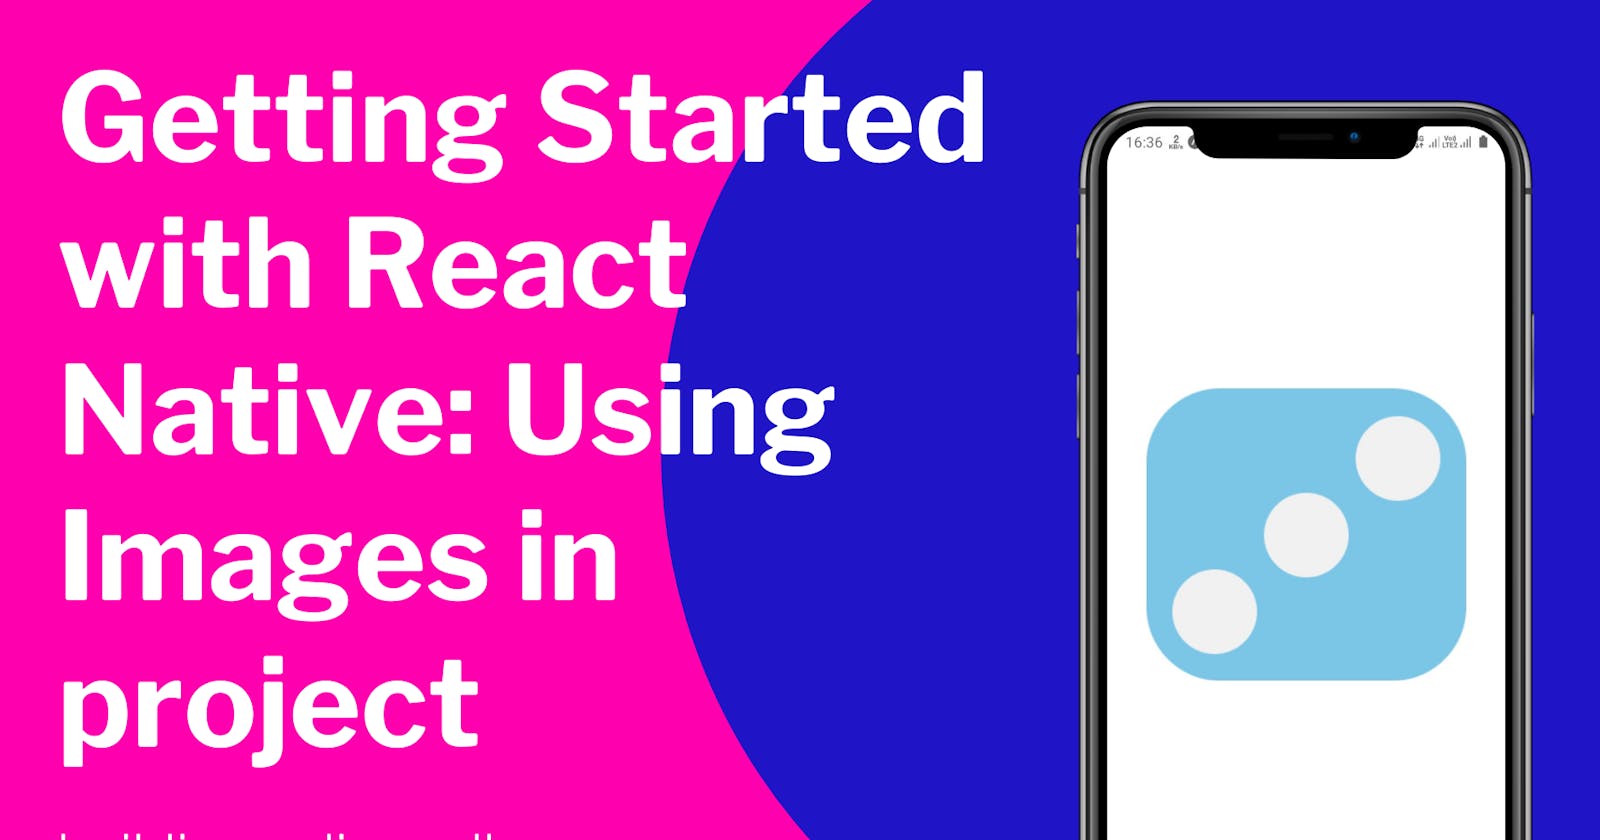 Getting Started with React Native: Using Images in project